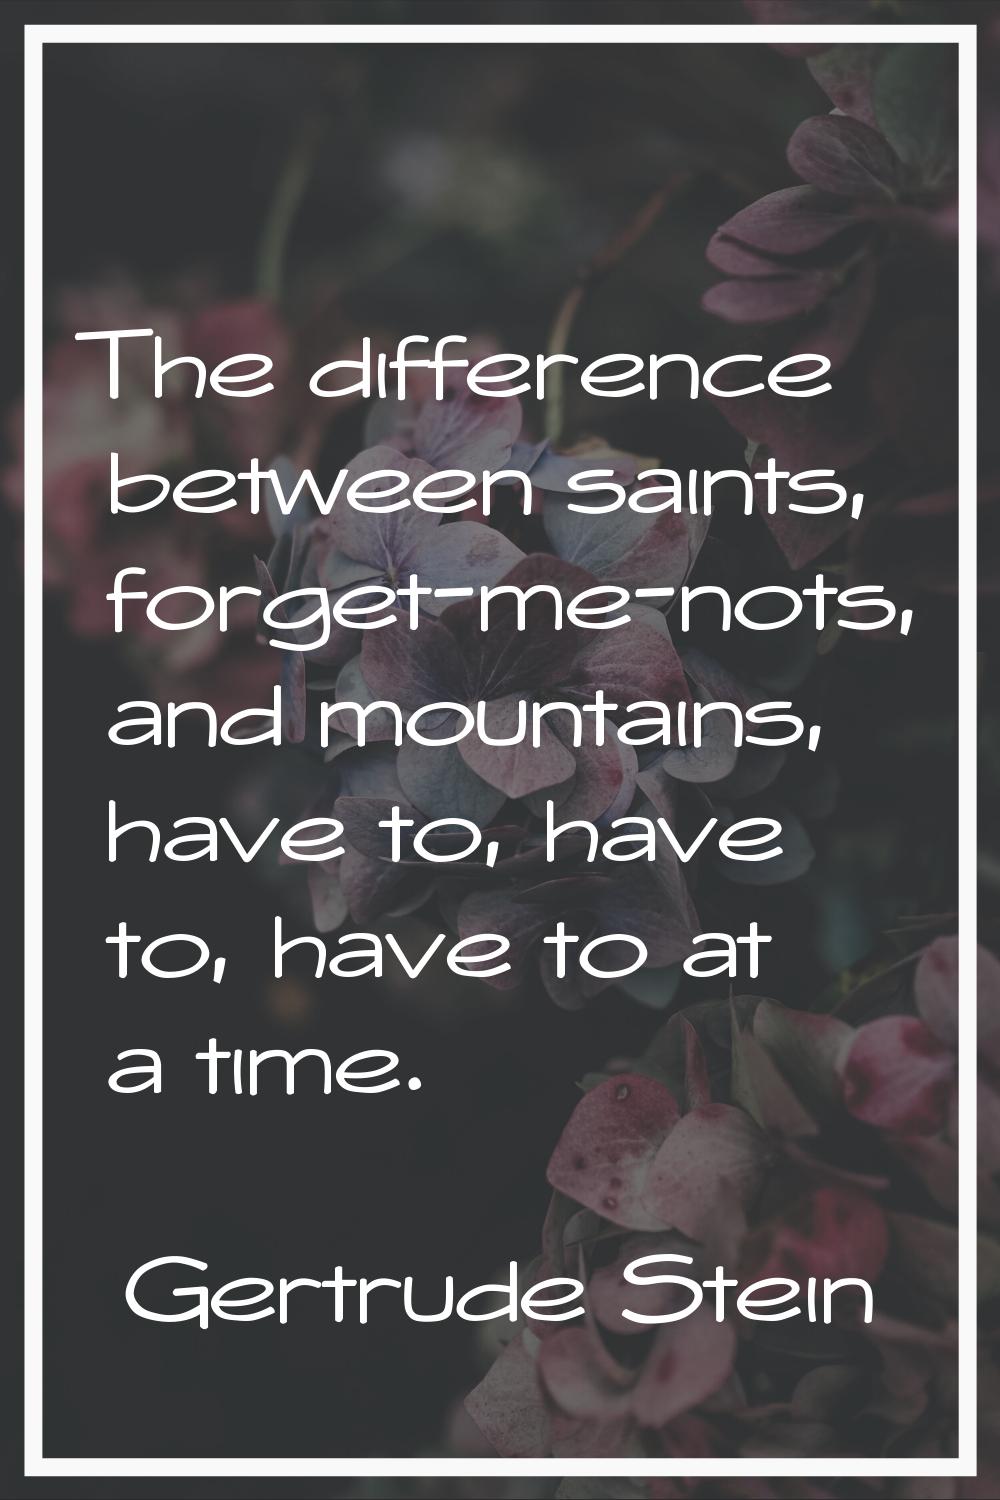 The difference between saints, forget-me-nots, and mountains, have to, have to, have to at a time.